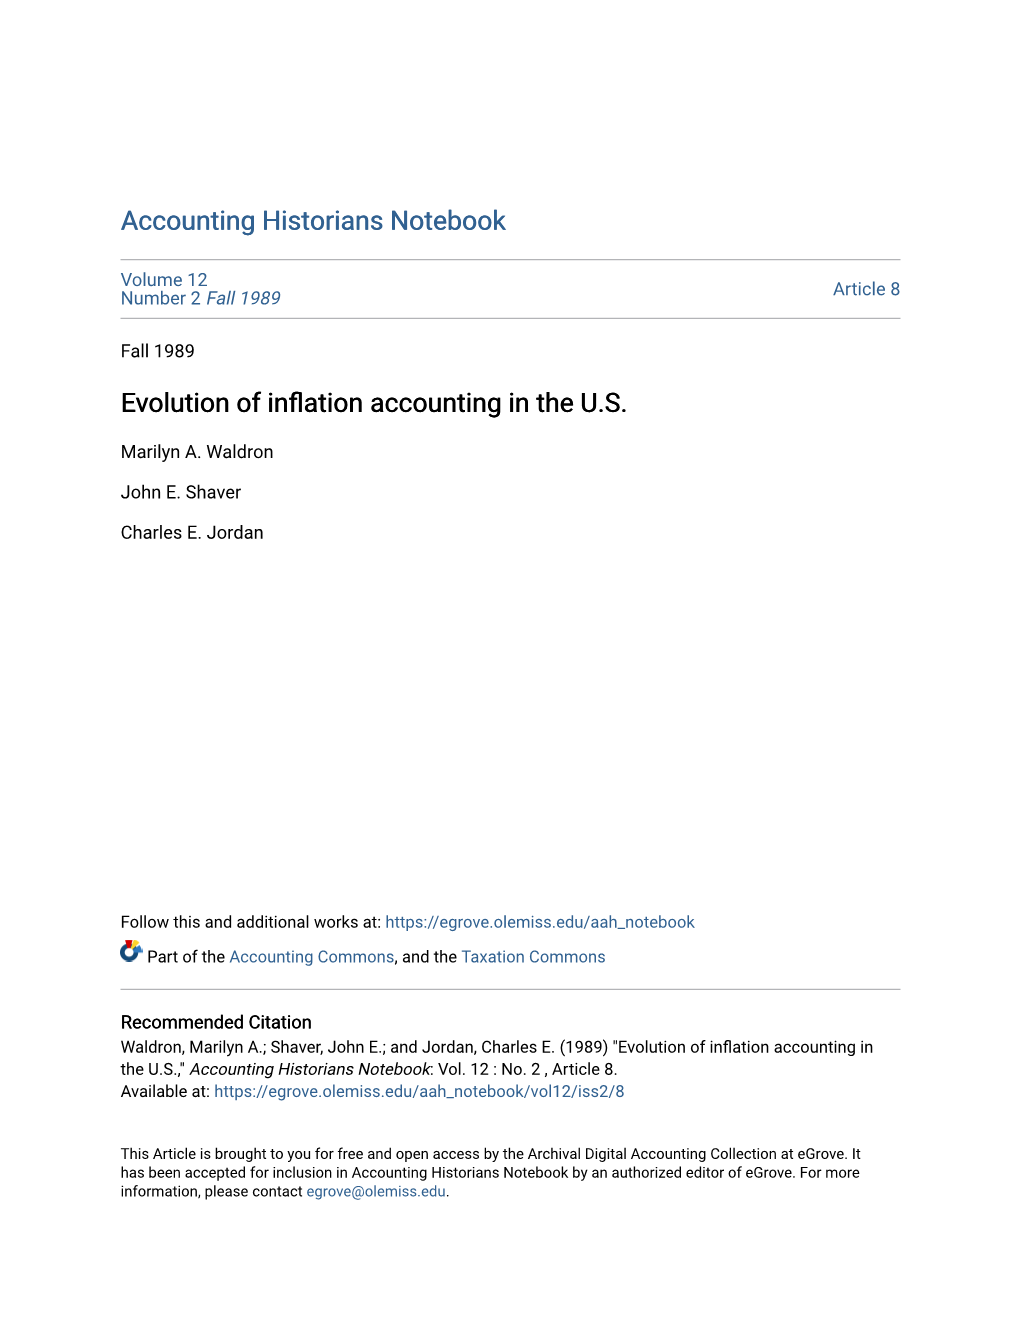 Evolution of Inflation Accounting in the U.S